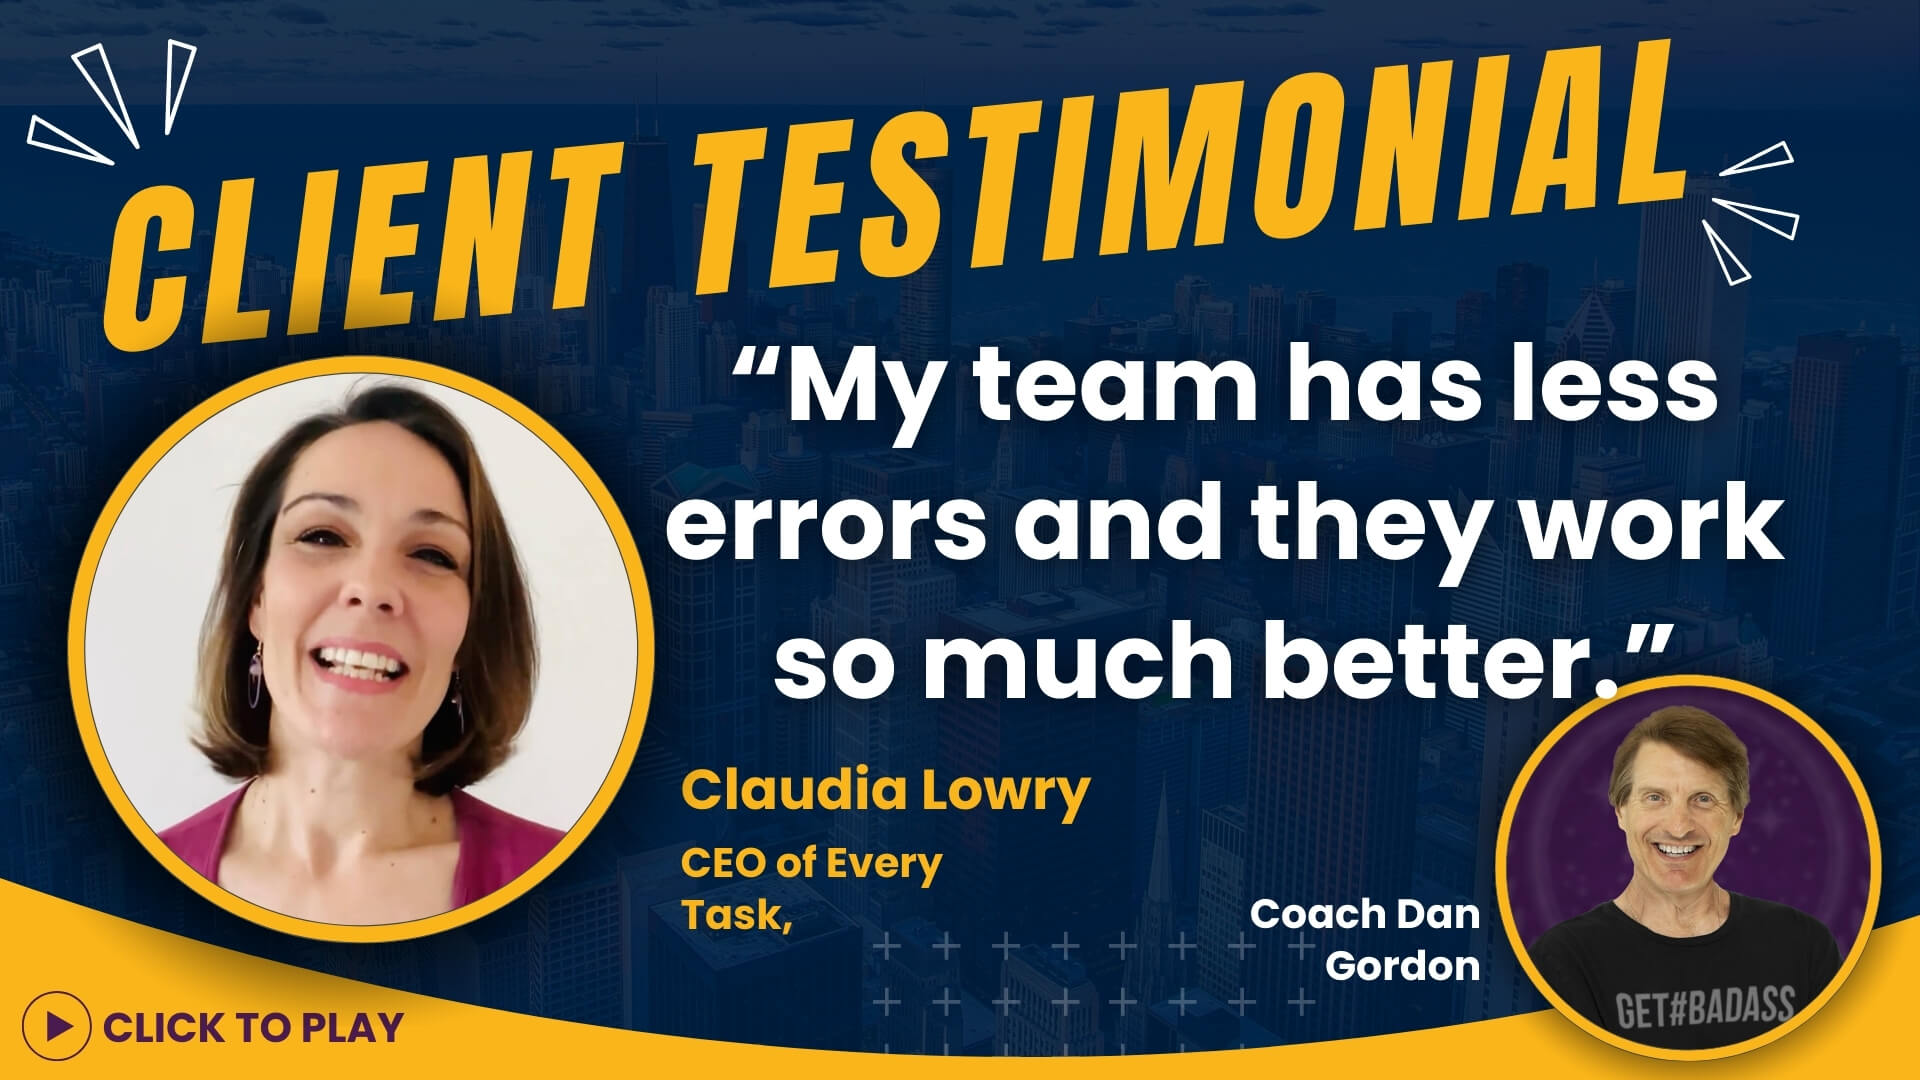 CEO Claudia Lowry from Virtual Assistant Co. praises Coach Dan Gordon for his effective coaching that improved her team's performance, with a clickable 'Click to Play' video button.